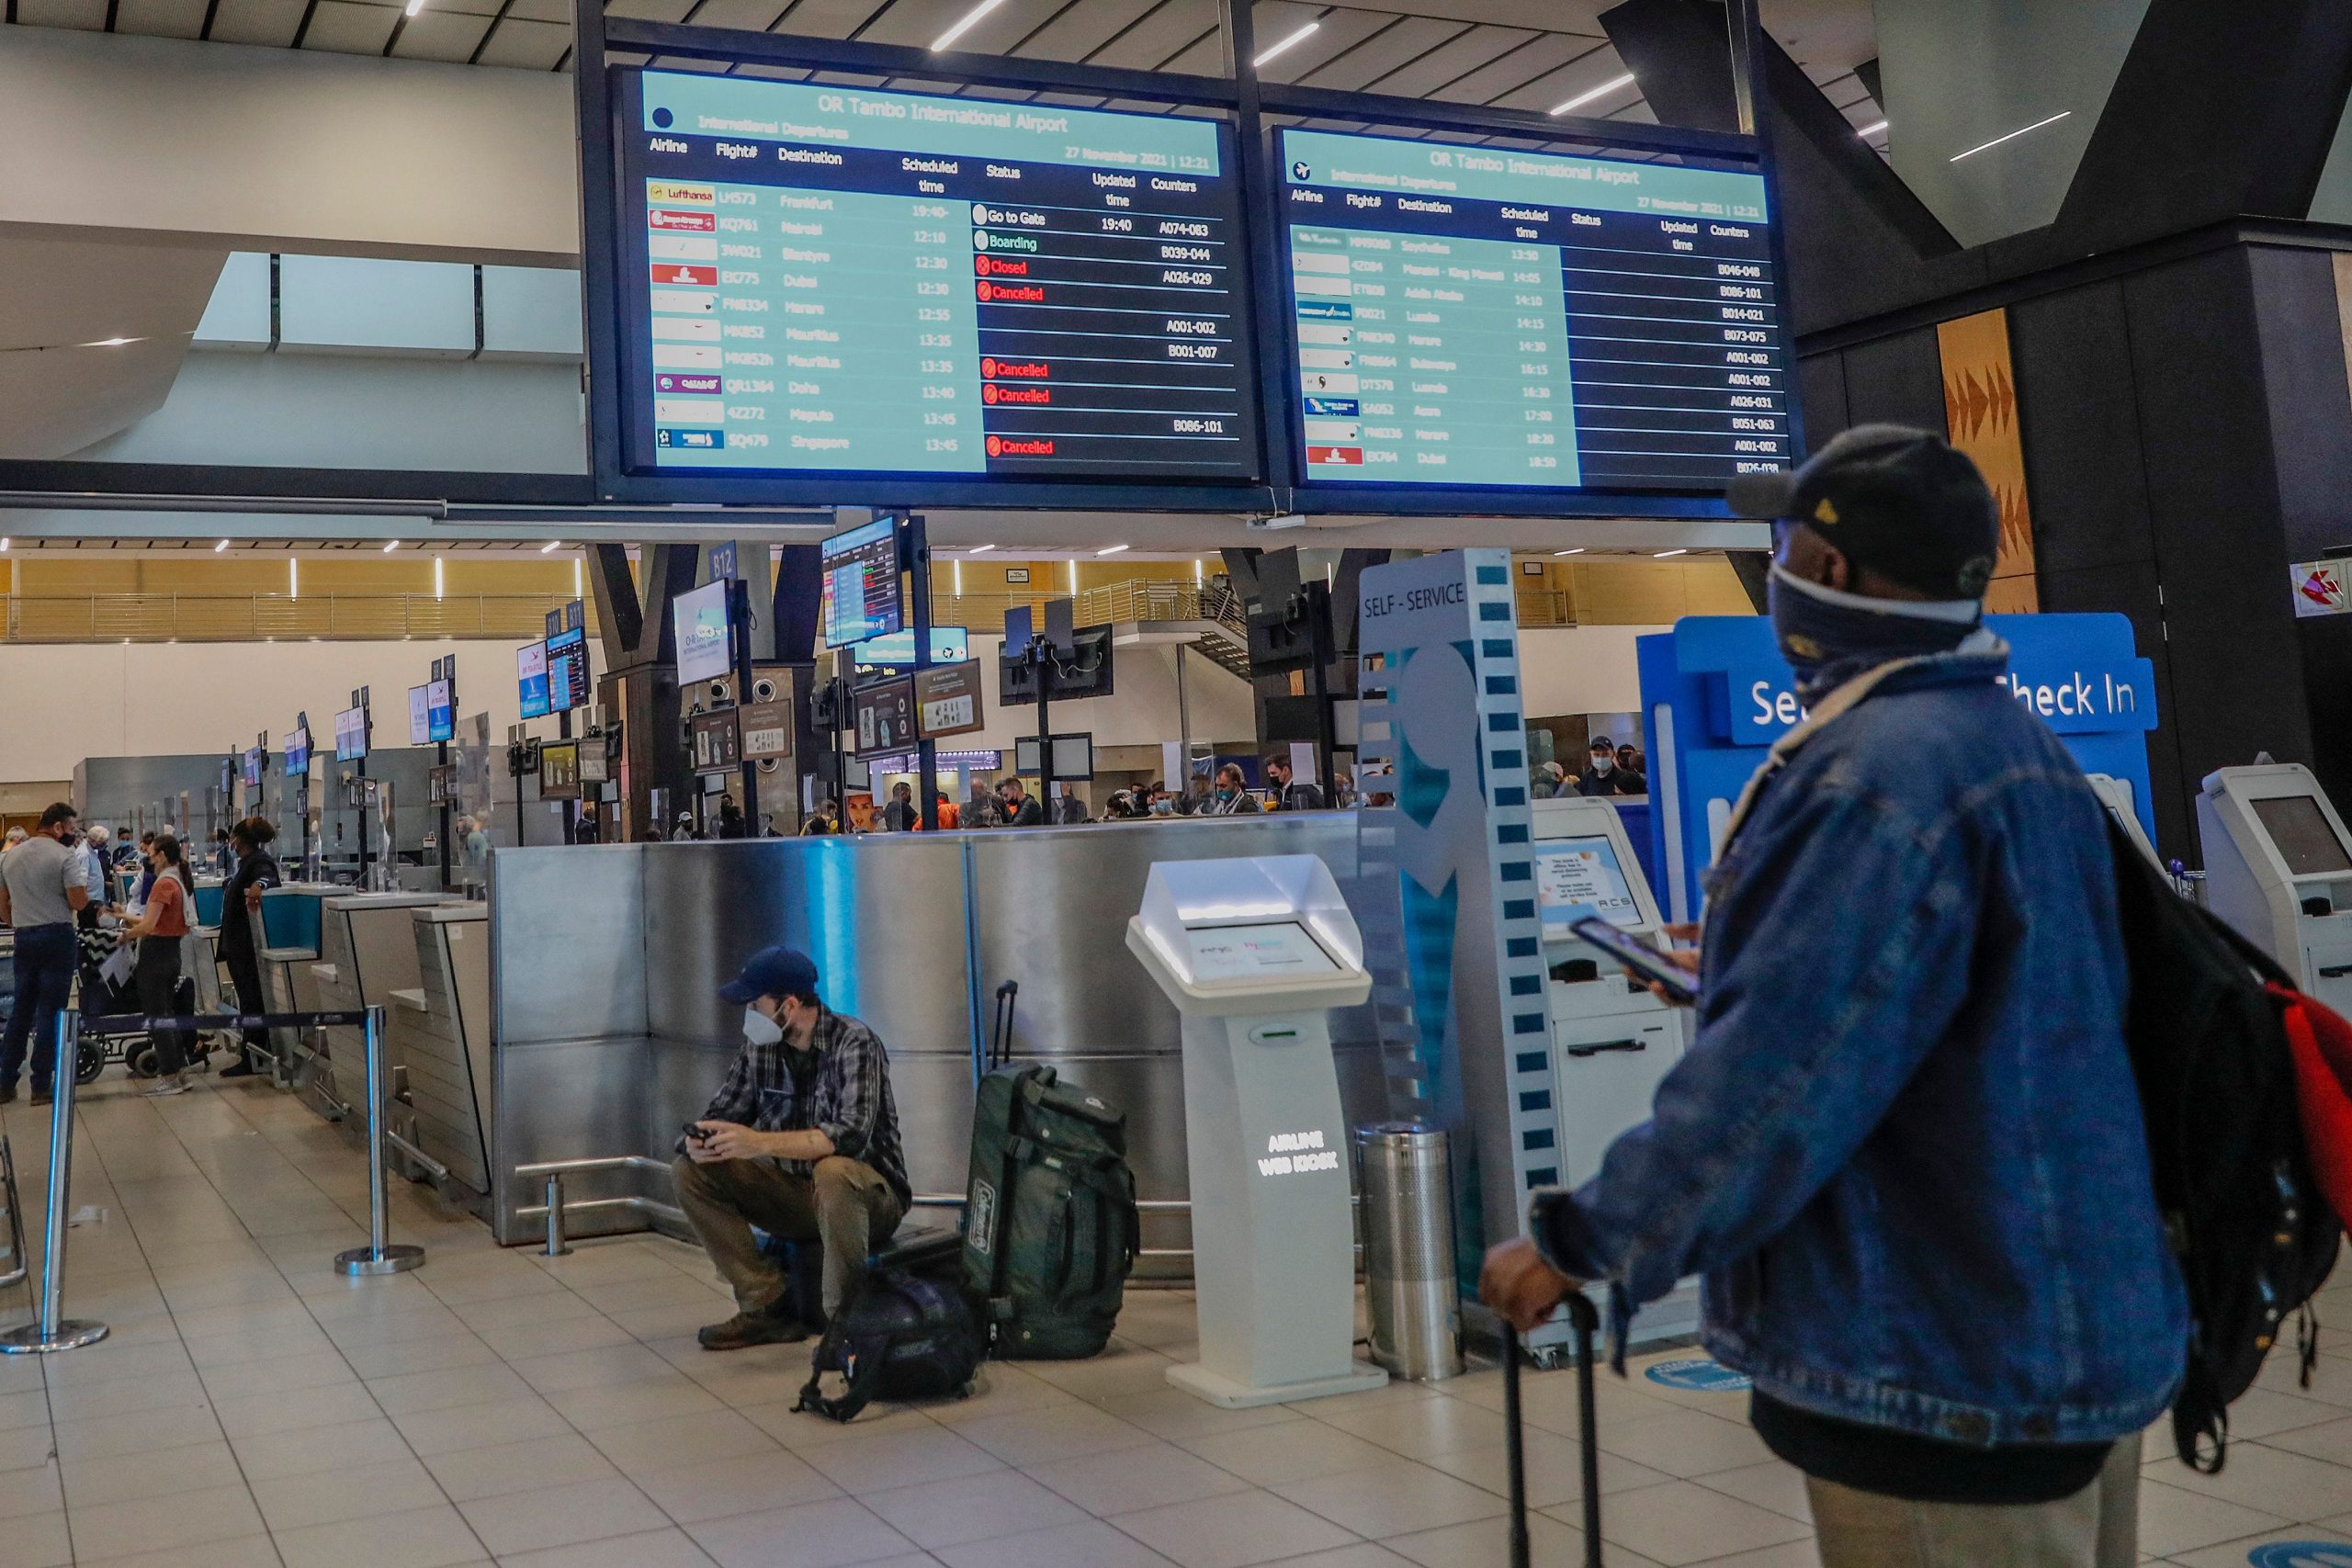 A passenger looks at an electronic flight notice board displaying cancelled flights at Tambo International Airport in Johannesburg on November 27, 2021, after several countries banned flights from South Africa following the discovery of a new coronavirus variant Omicron.